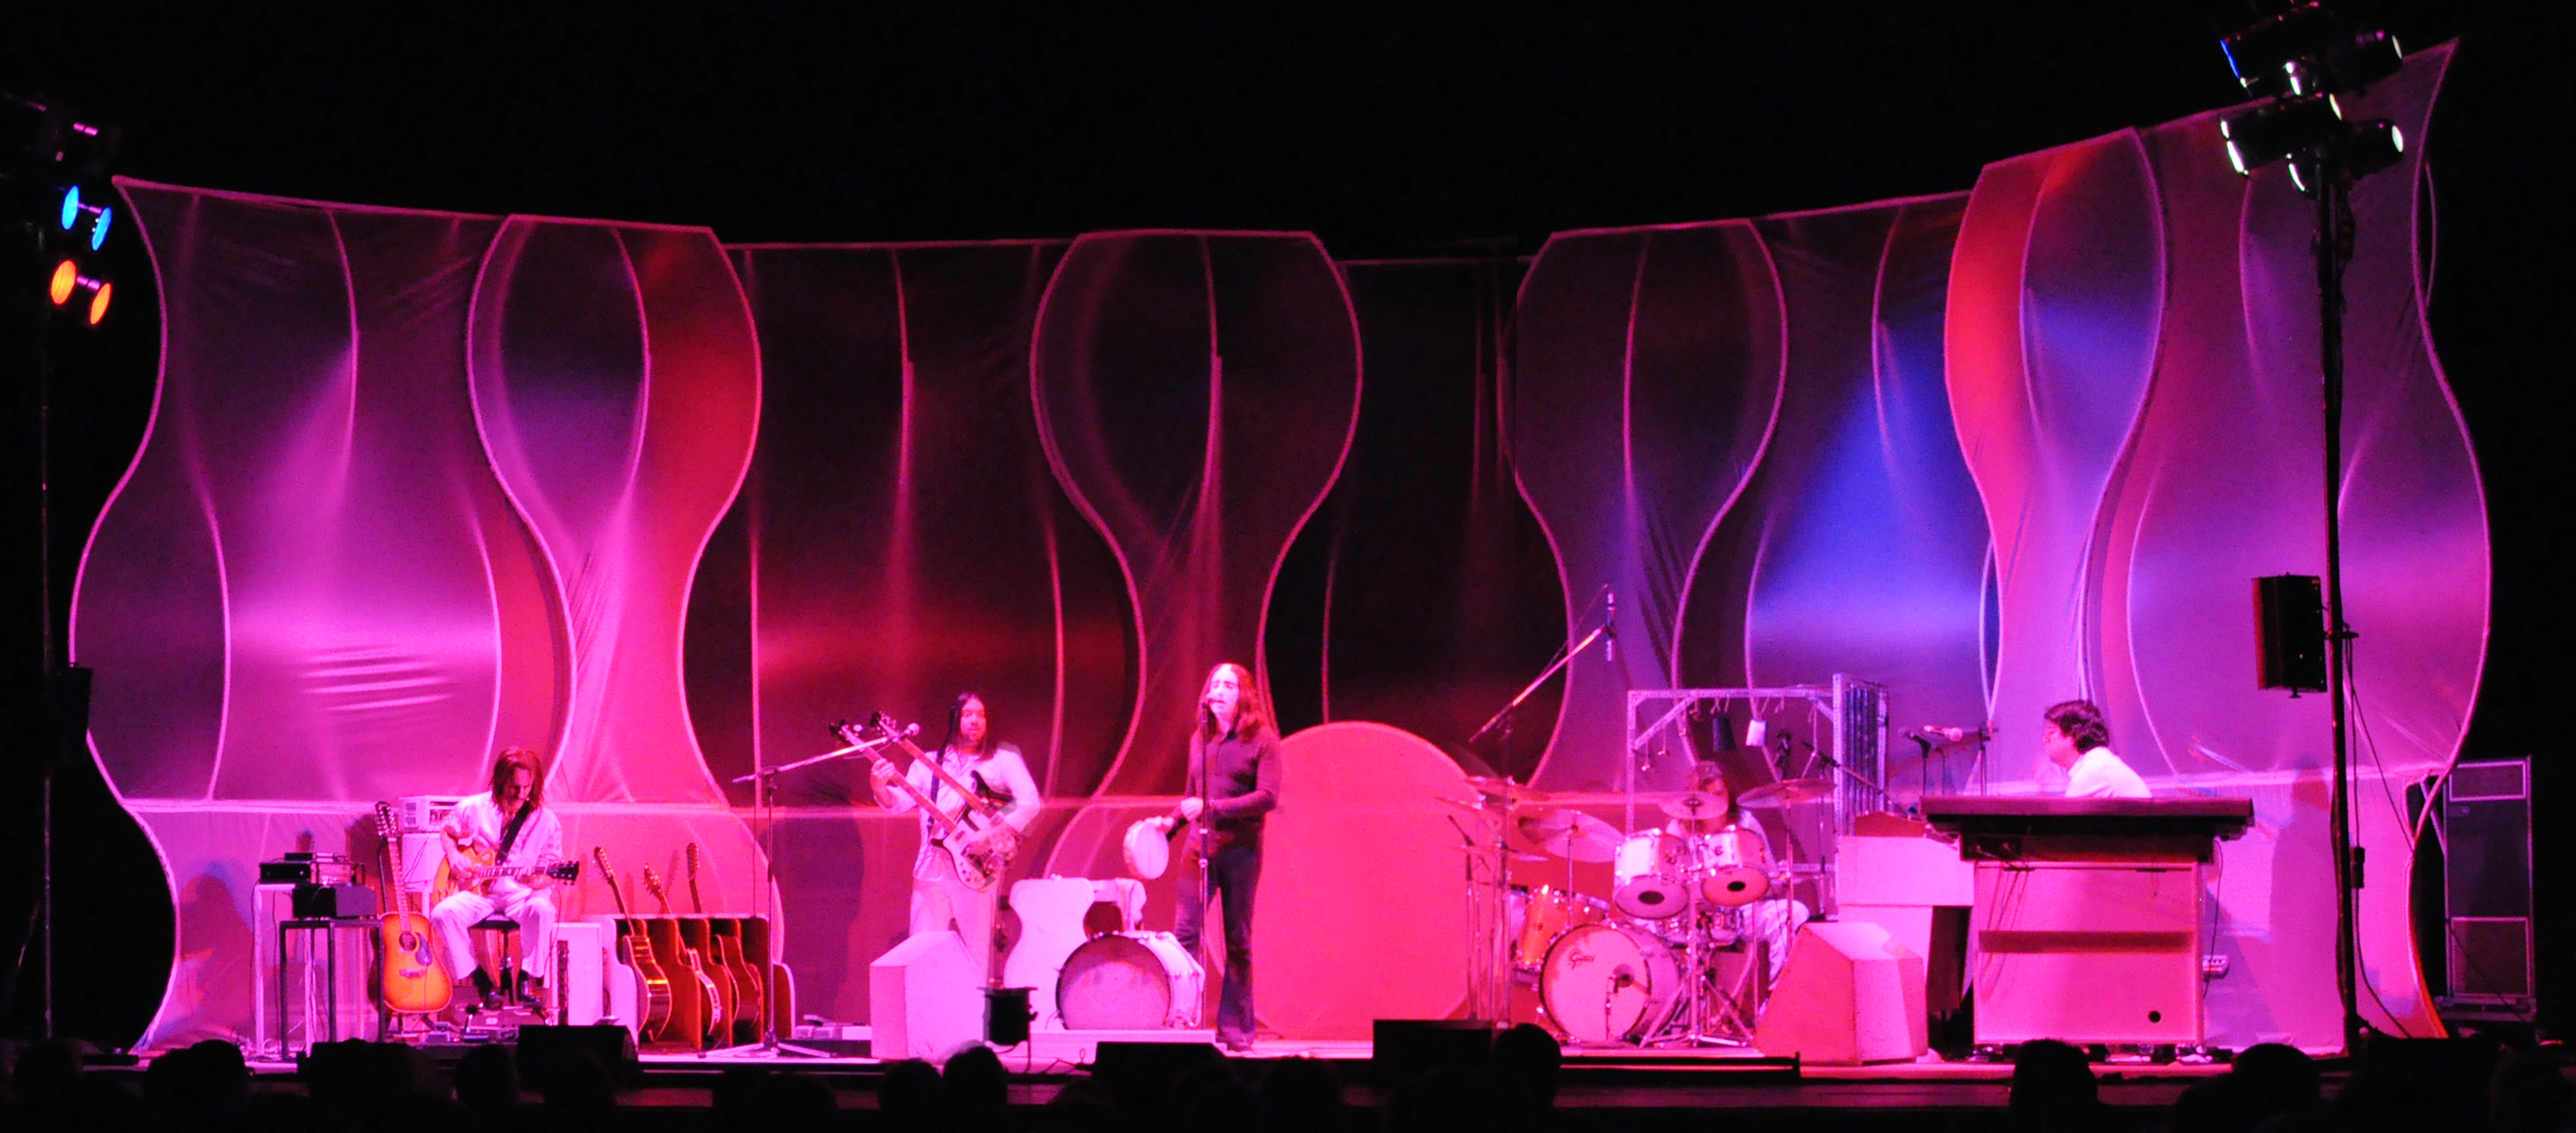 Genesis legacy band, The Musical Box, performing “Selling England by the Pound” in 2013 